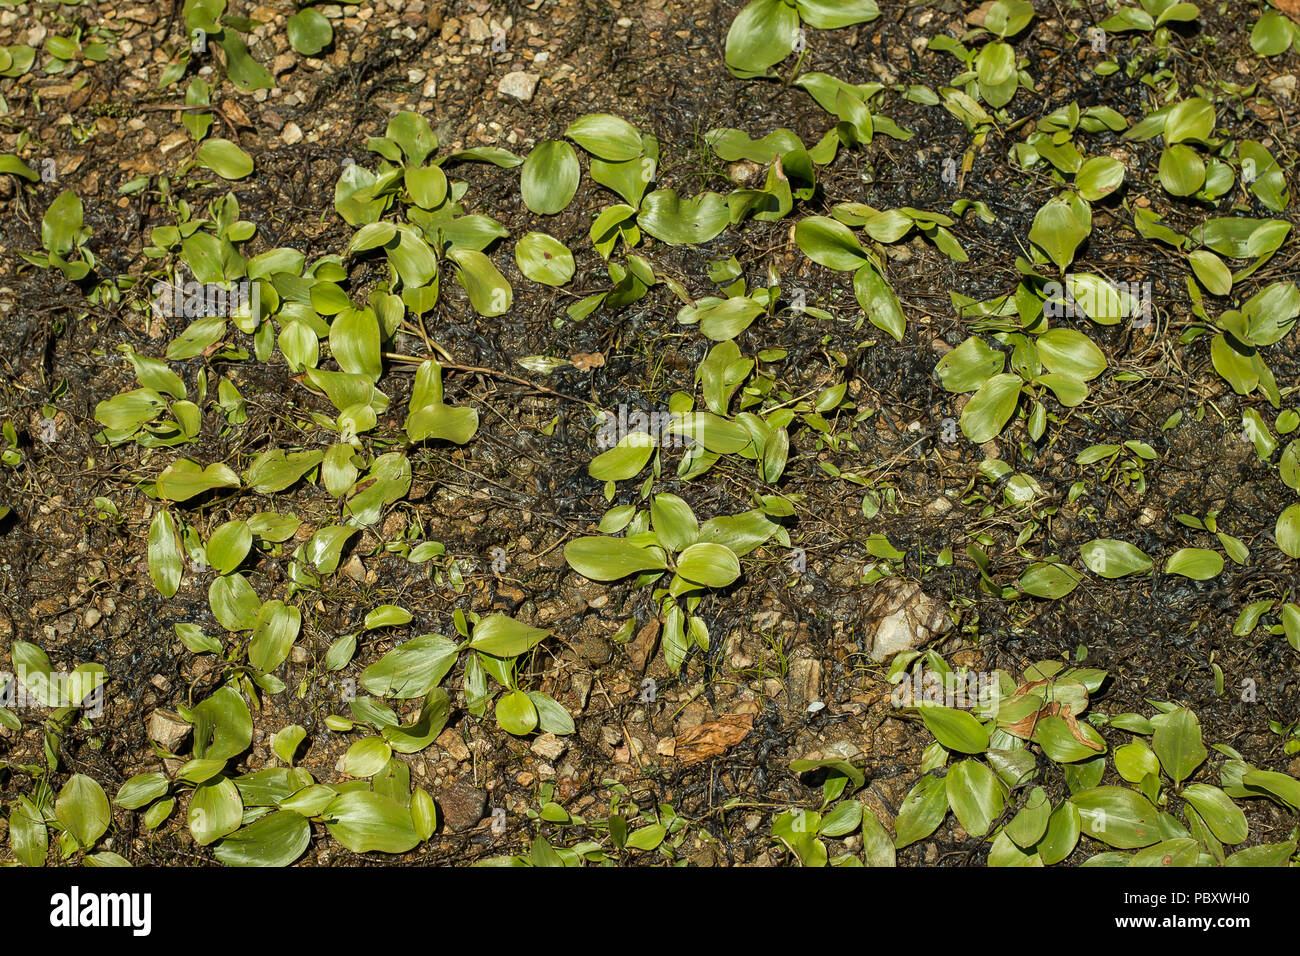 Terrestial form of Potamogeton natans - broad-leaved pondweed on the shore of lake Stock Photo